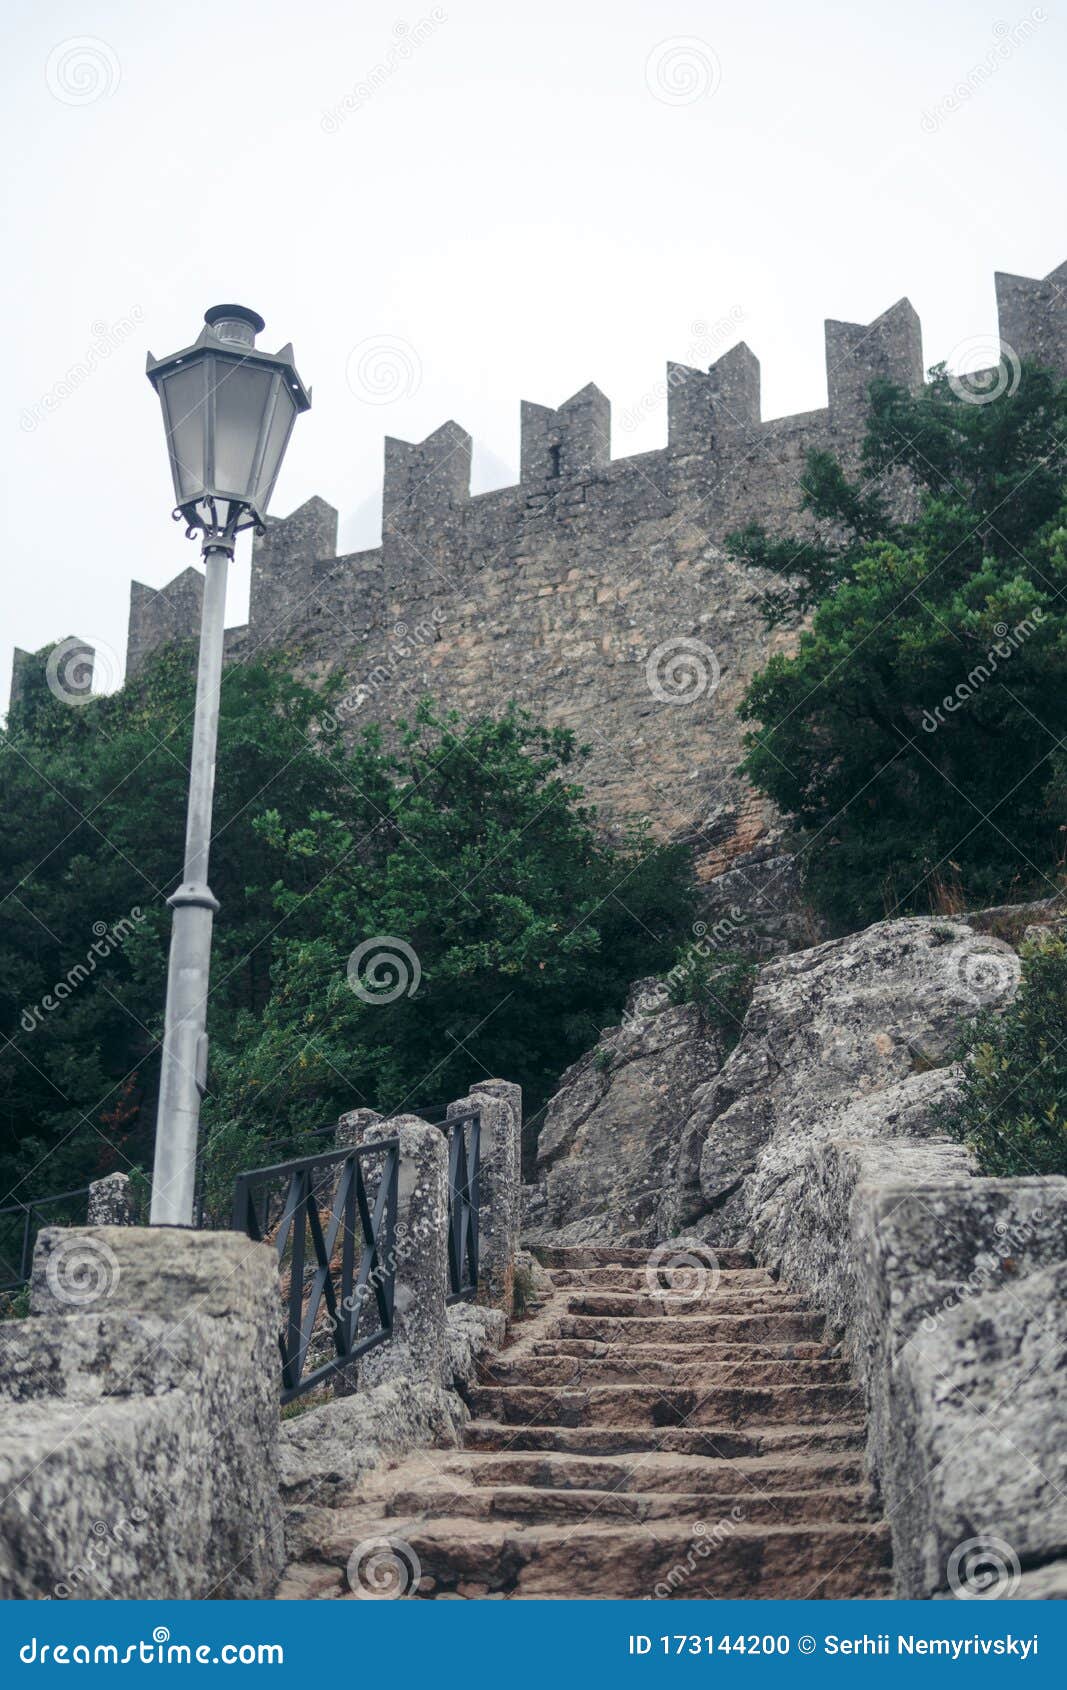 The Fortress, Steps, Stairs and Street Lamp. Mystical Atmosphere, Fog